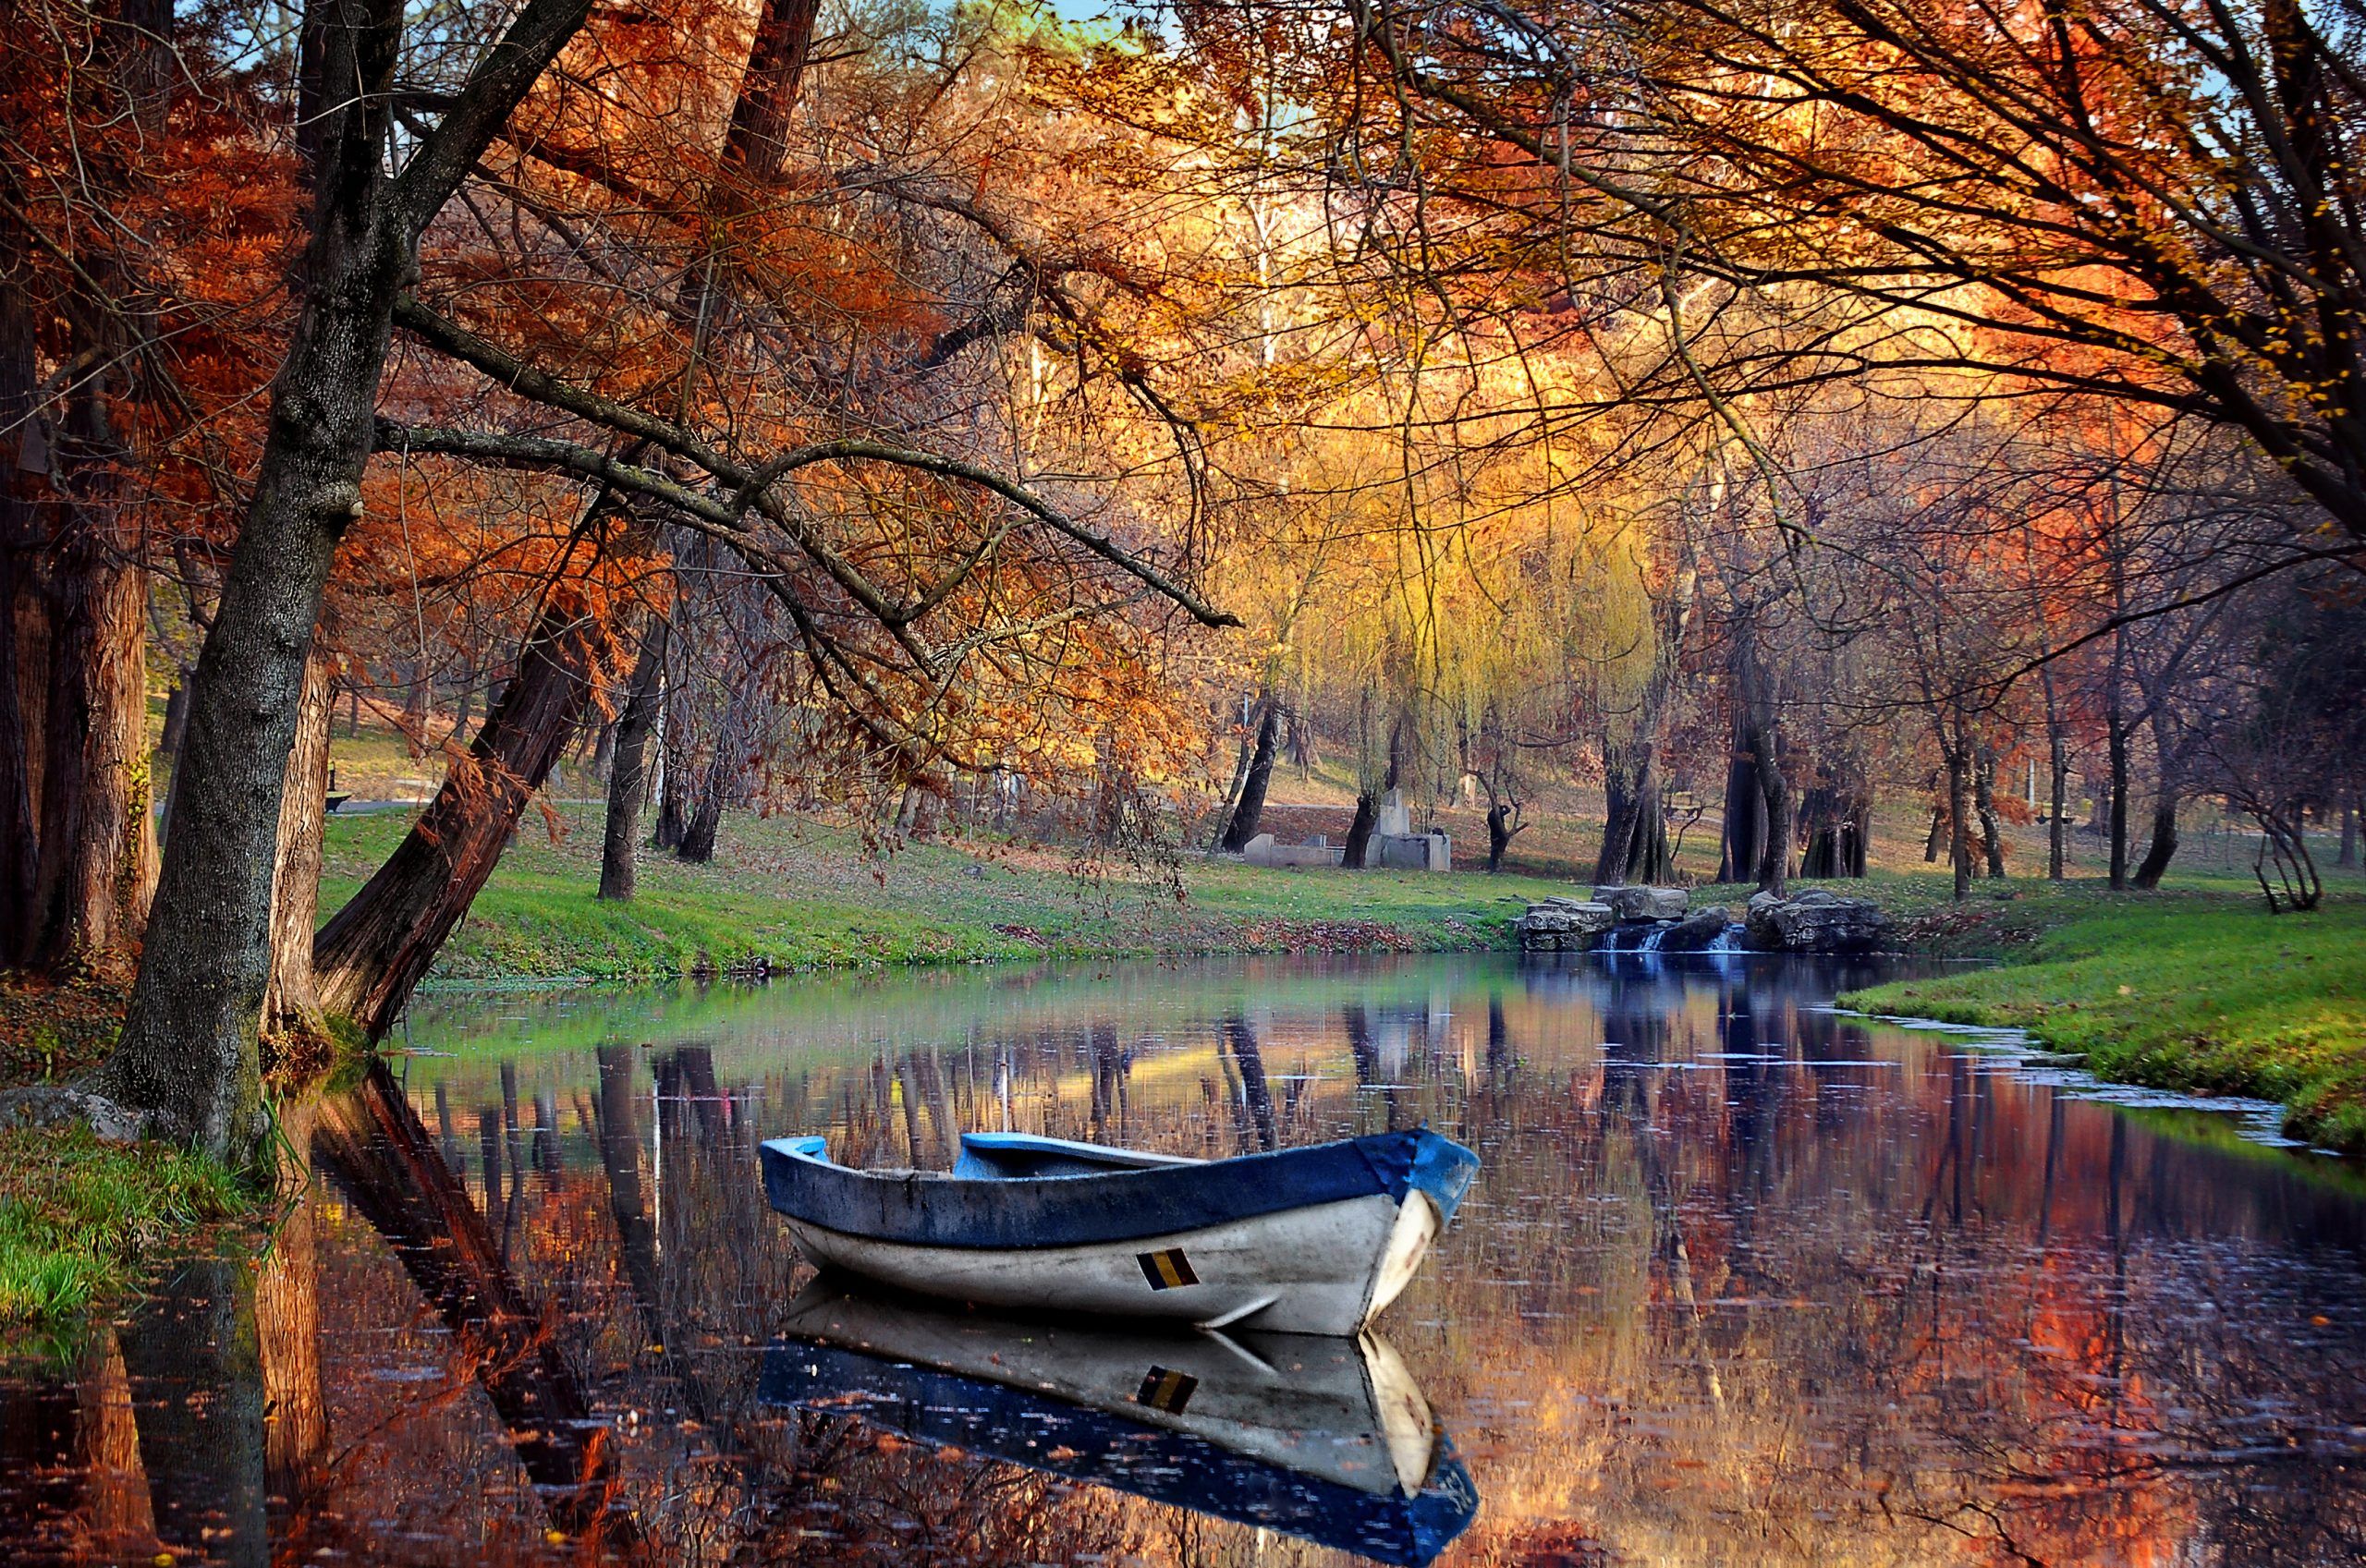 A peaceful image of a white and blue row boat near the shore of a pond, surrounded by trees that are changing colors for fall.